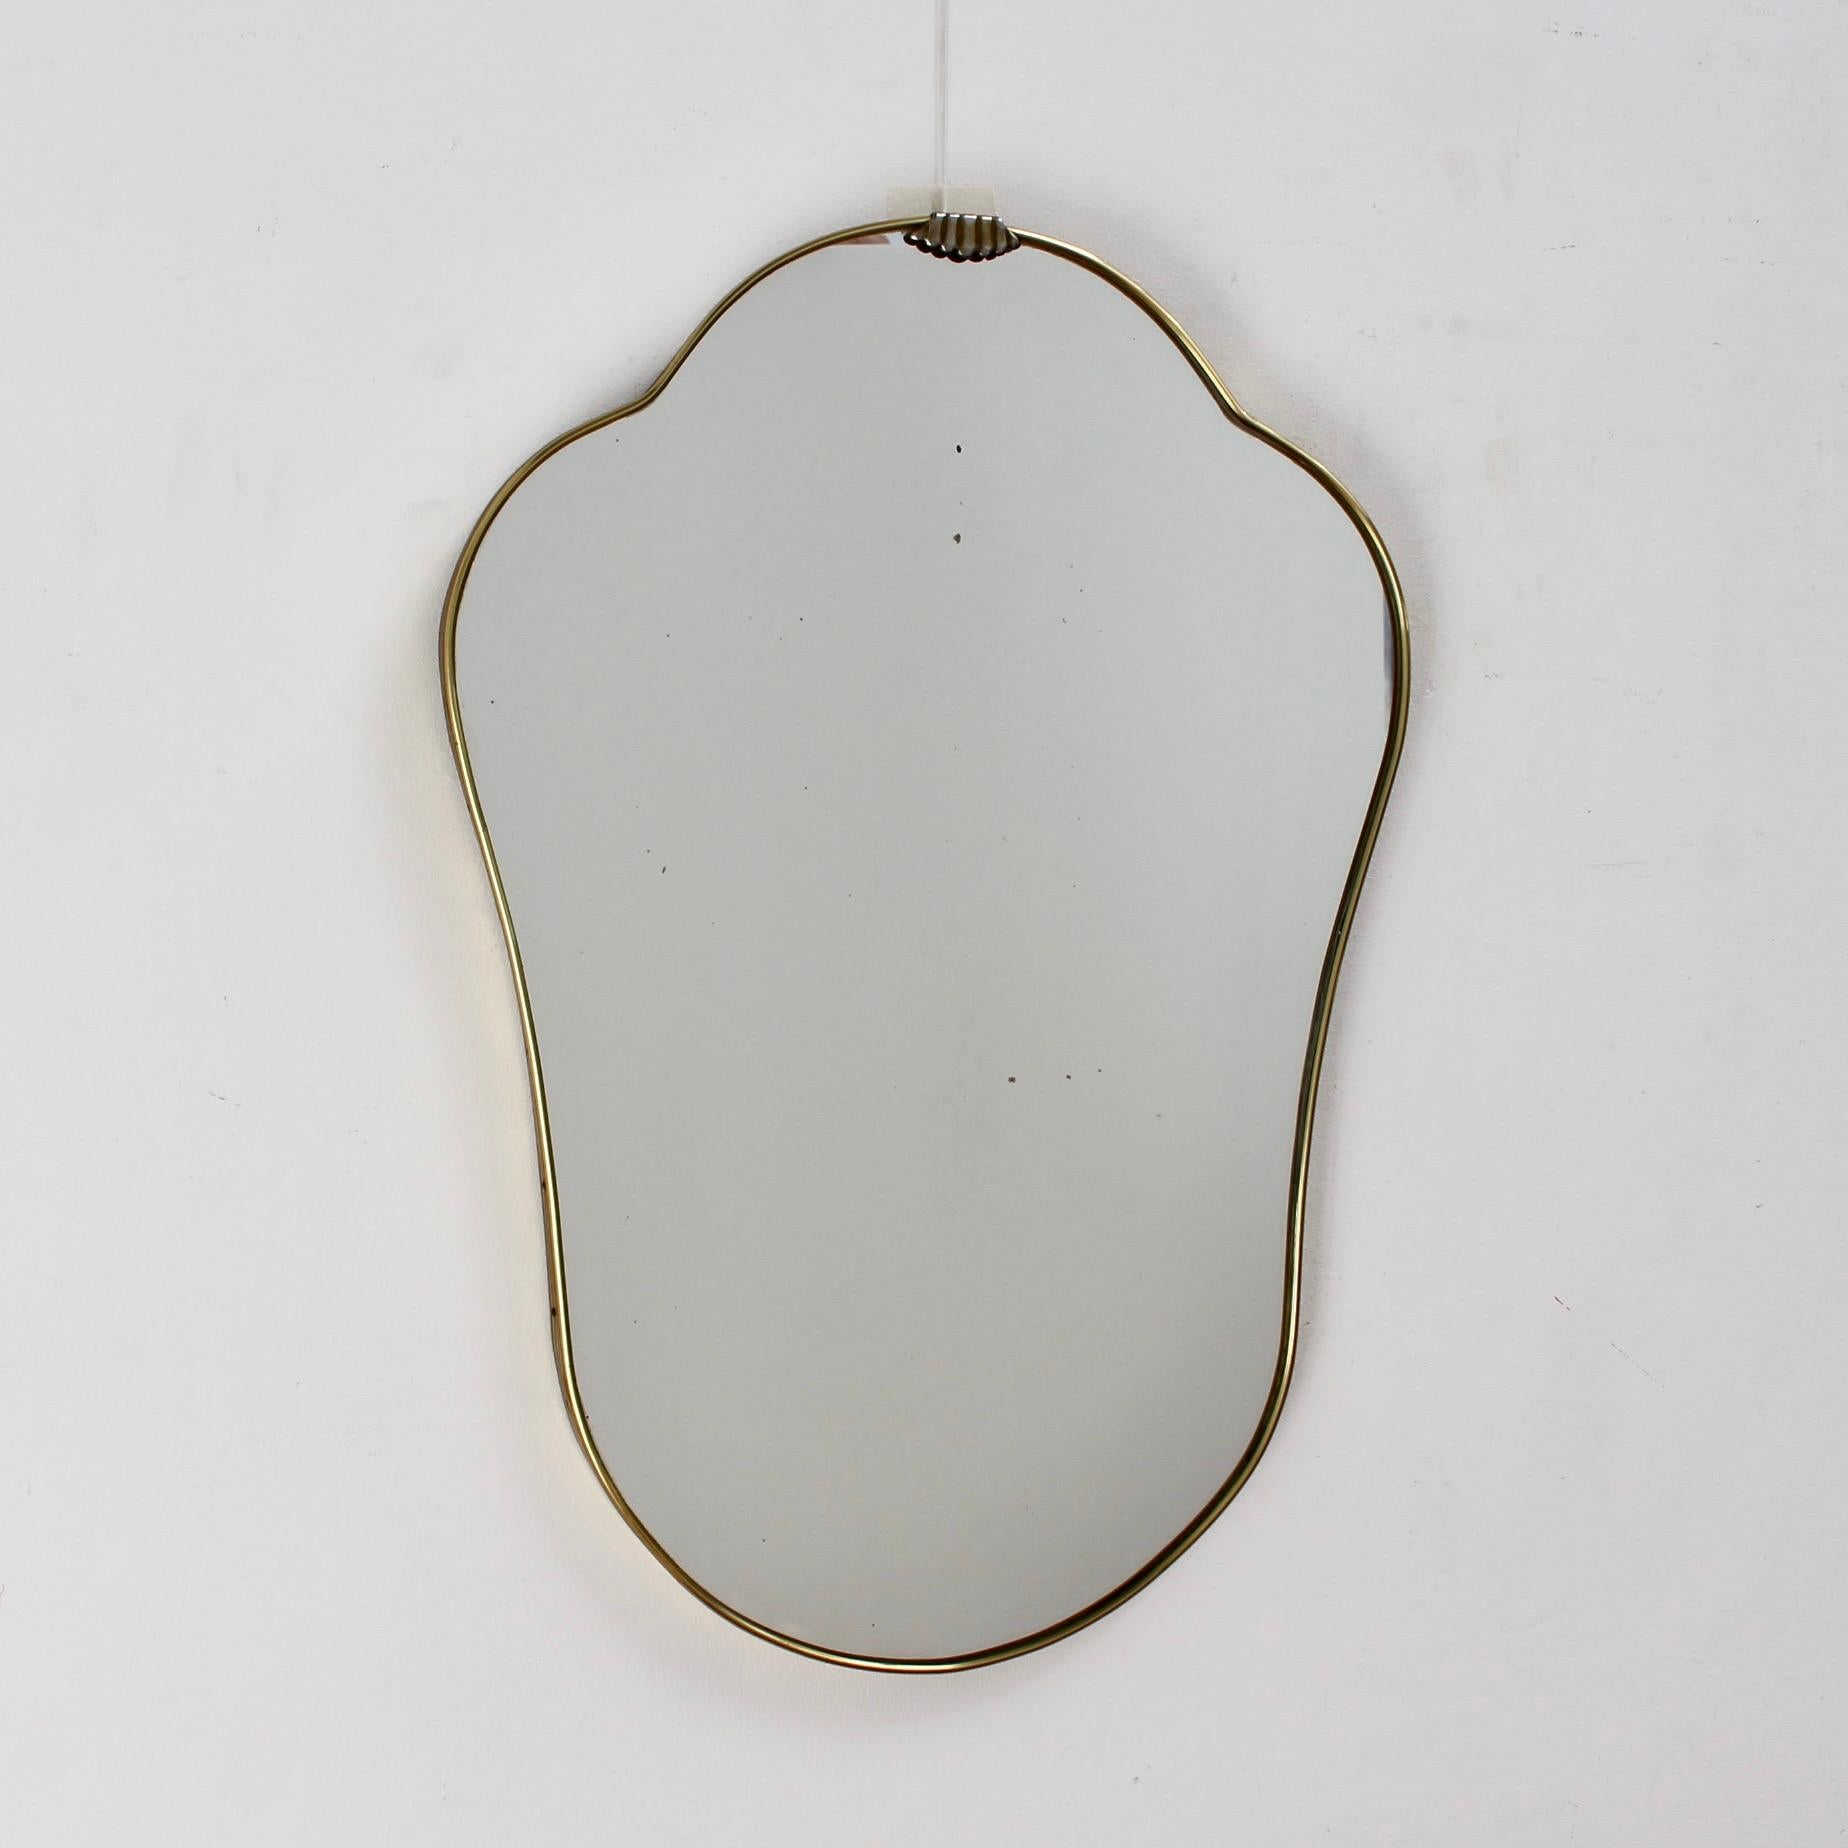 Mid-century Italian wall mirror with brass frame (circa 1950s). The mirror sports a very original shape - always classically elegant and distinctive in a modern Gio Ponti style. In fair overall condition, a characterful vintage patina is on the